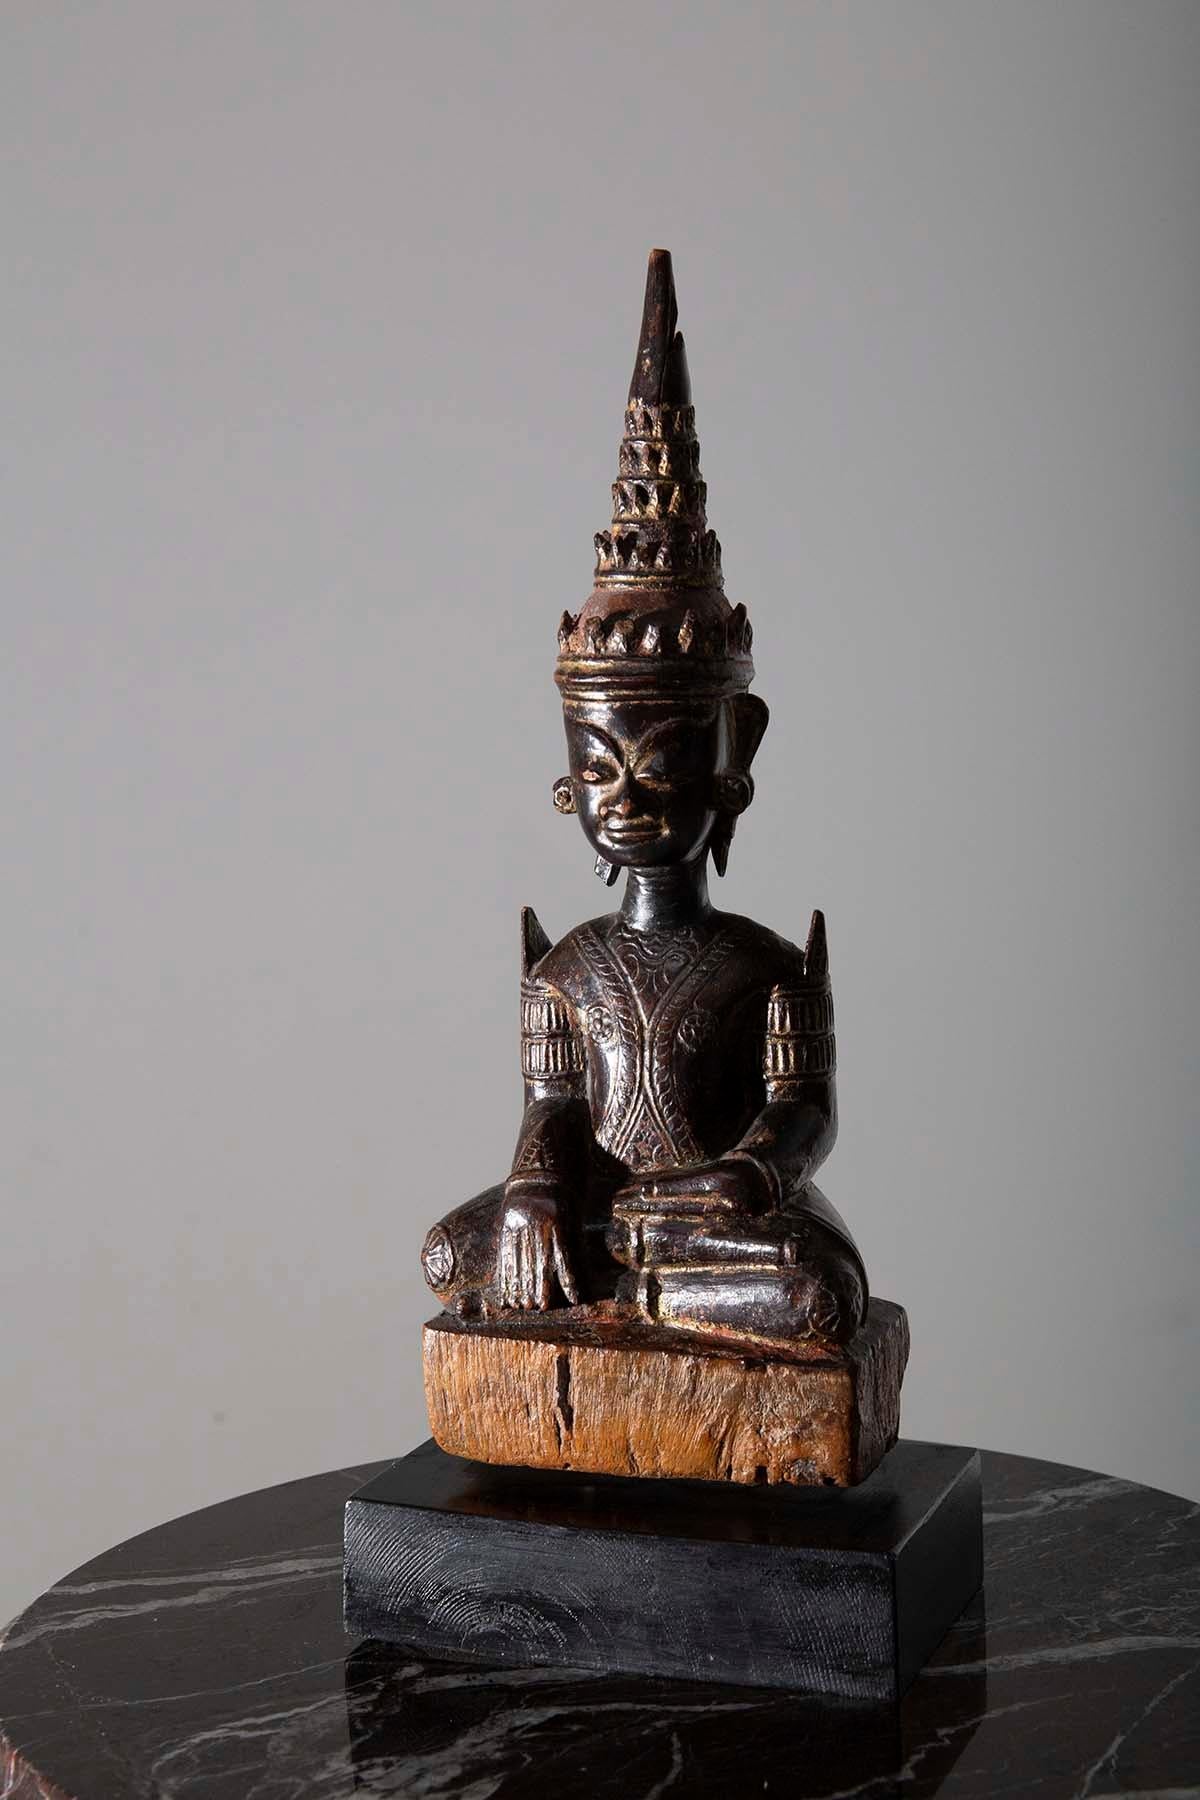 In a corner of a serene temple, bathed in the soft golden light of dawn, stands a Buddha like no other. This exquisite embodiment of spiritual devotion comes from the heart of Thailand and southern Burma, testimony to centuries of unwavering faith